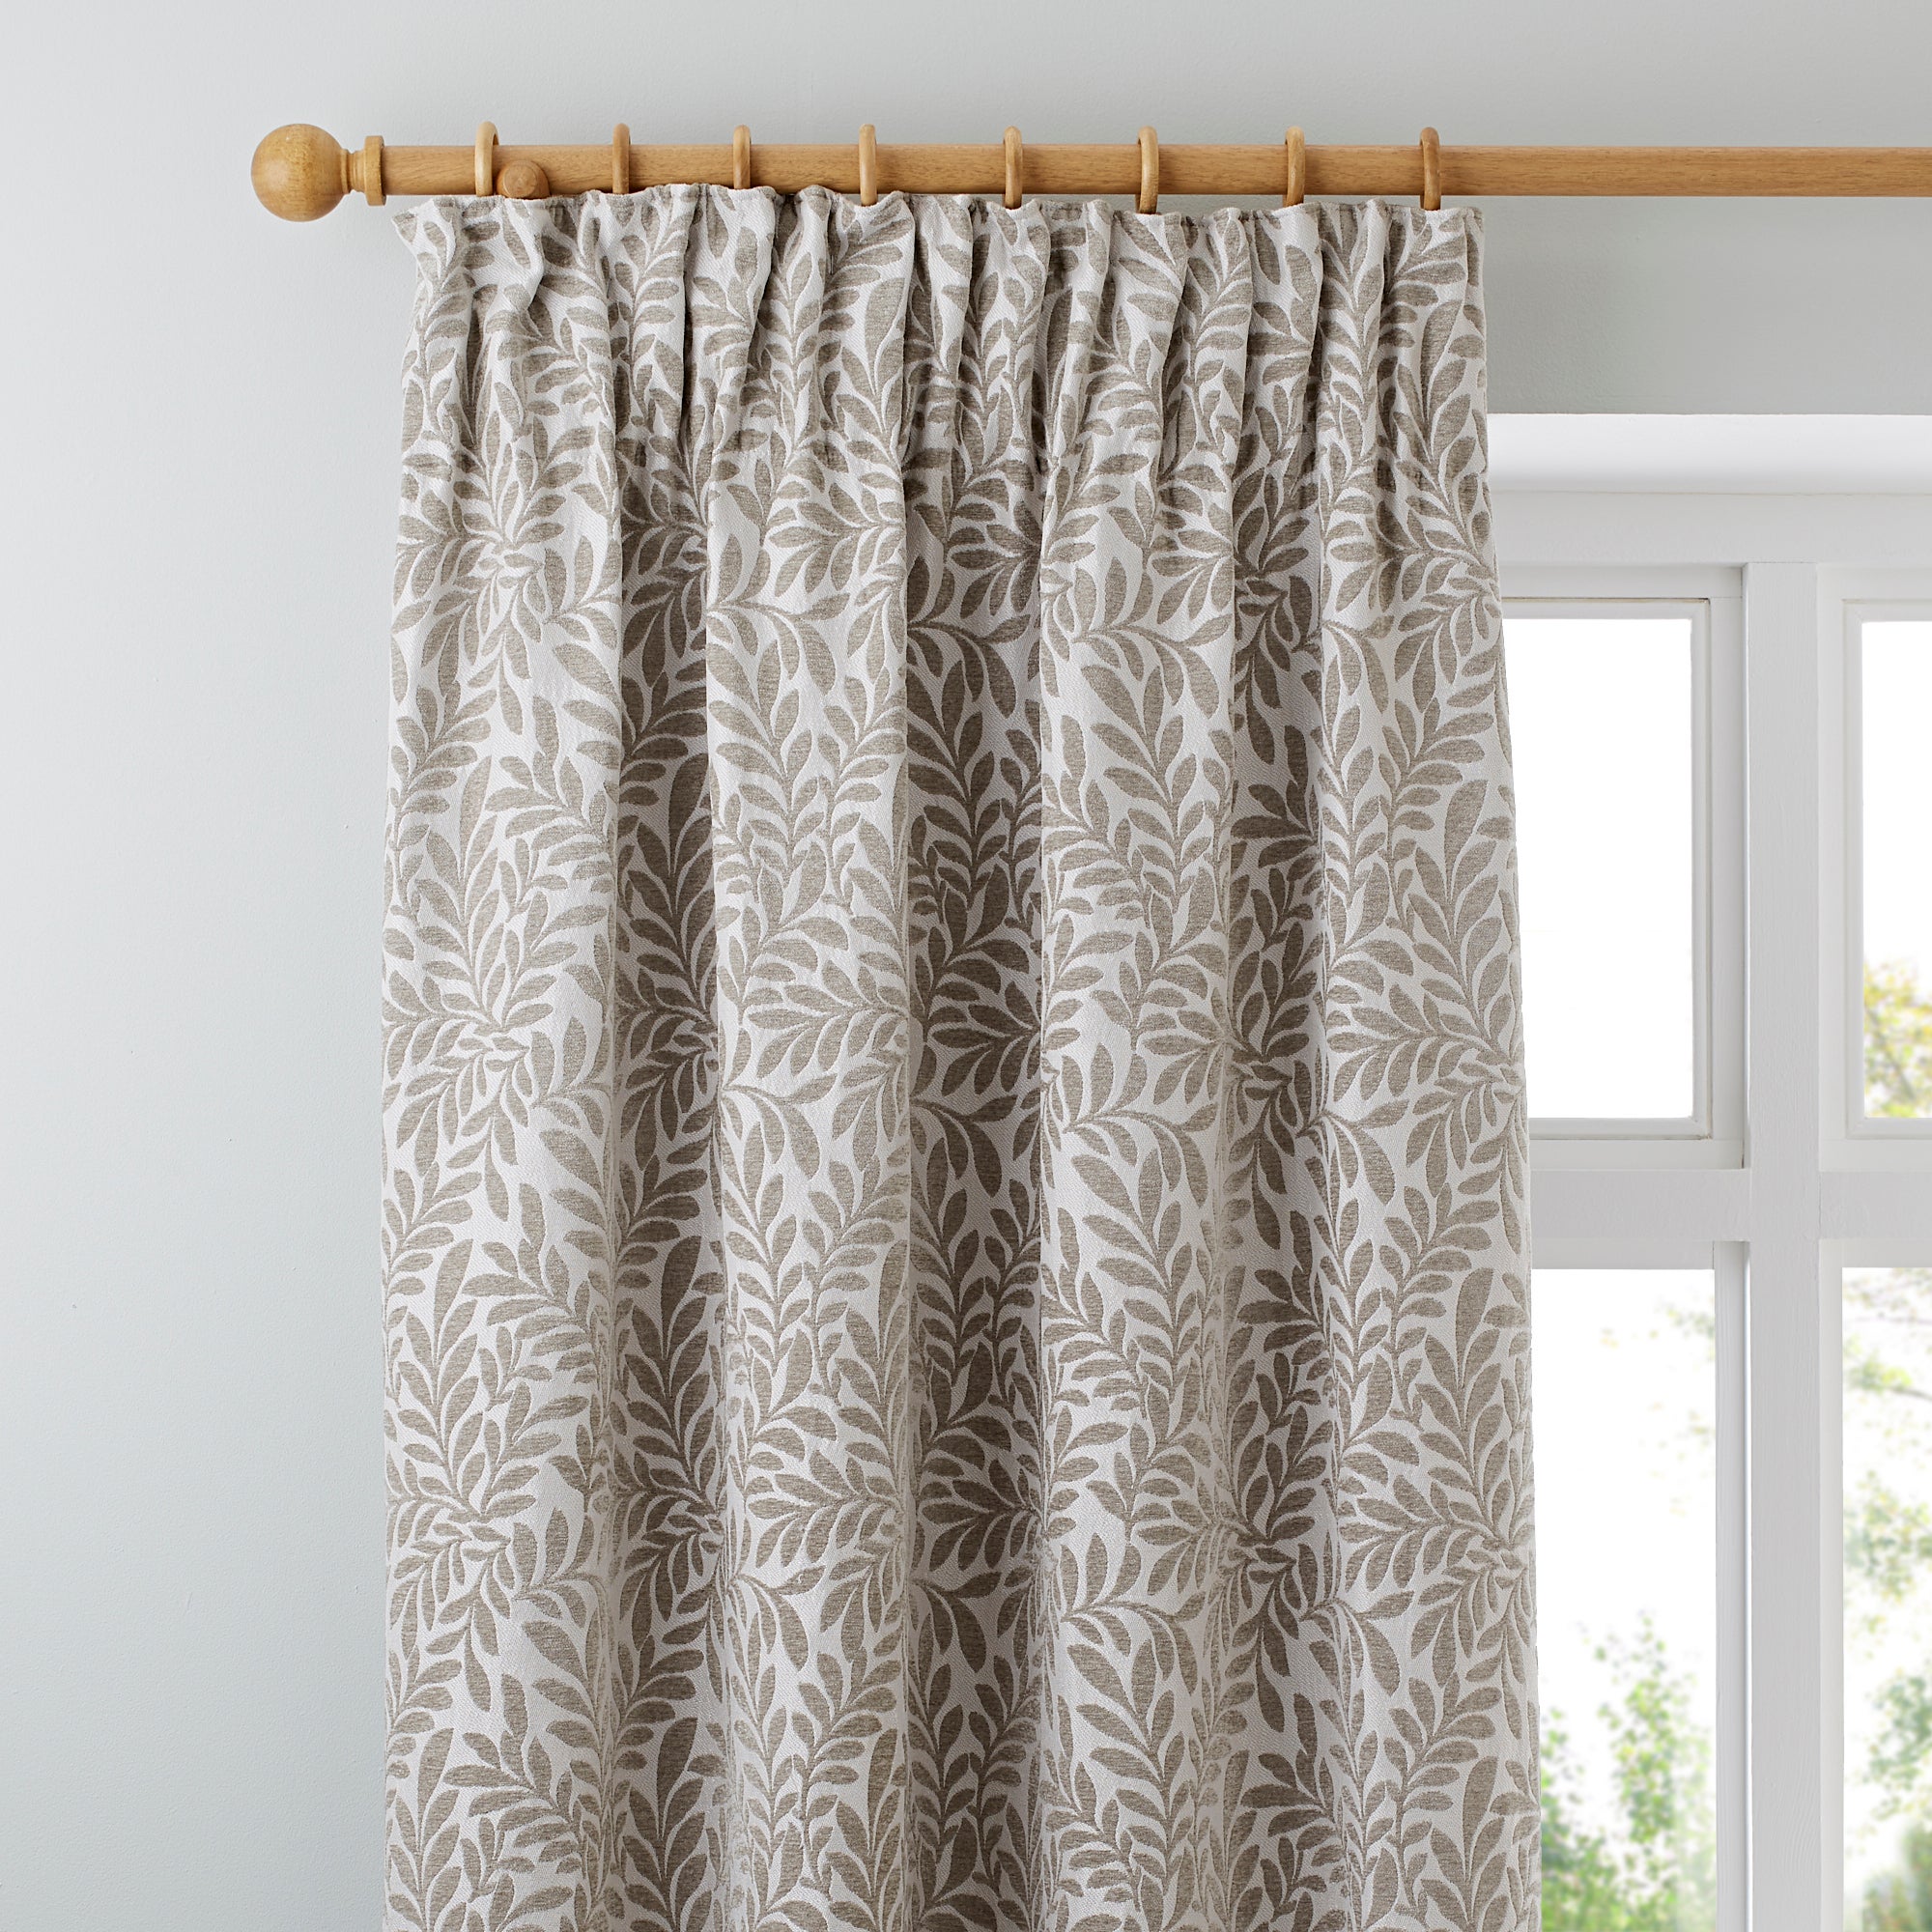 Dorma Lyndhurst Natural Lined Pencil Pleat Curtains Natural